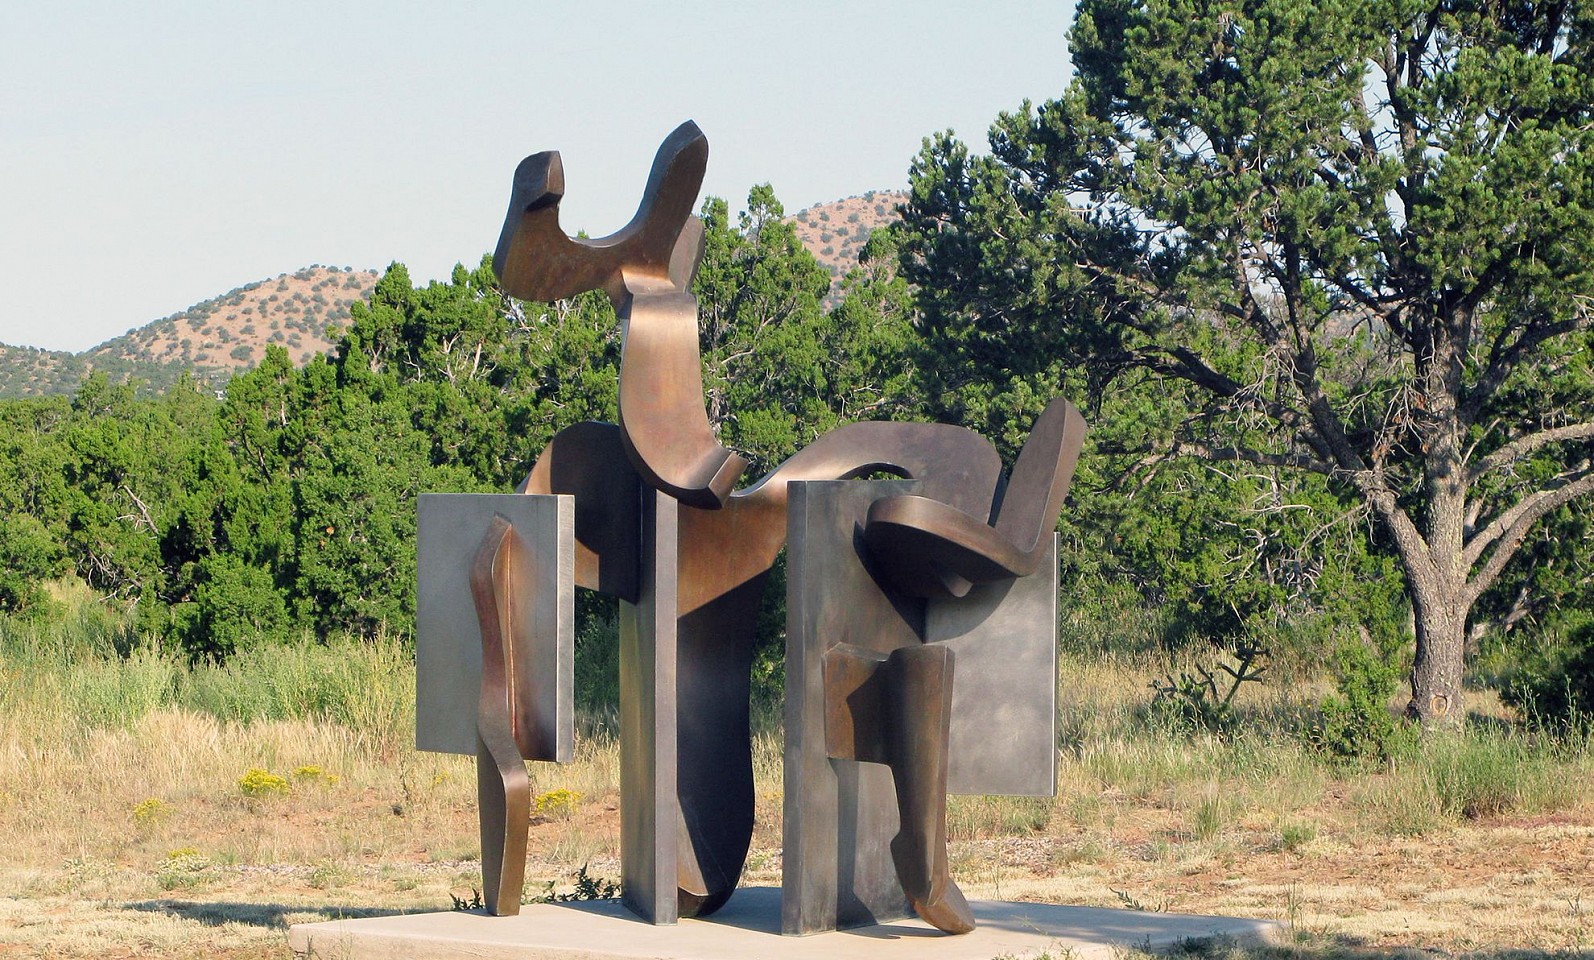 Bill Barrett, Z Libretto
Fabricated Bronze and Stainless Steel
BARR00034